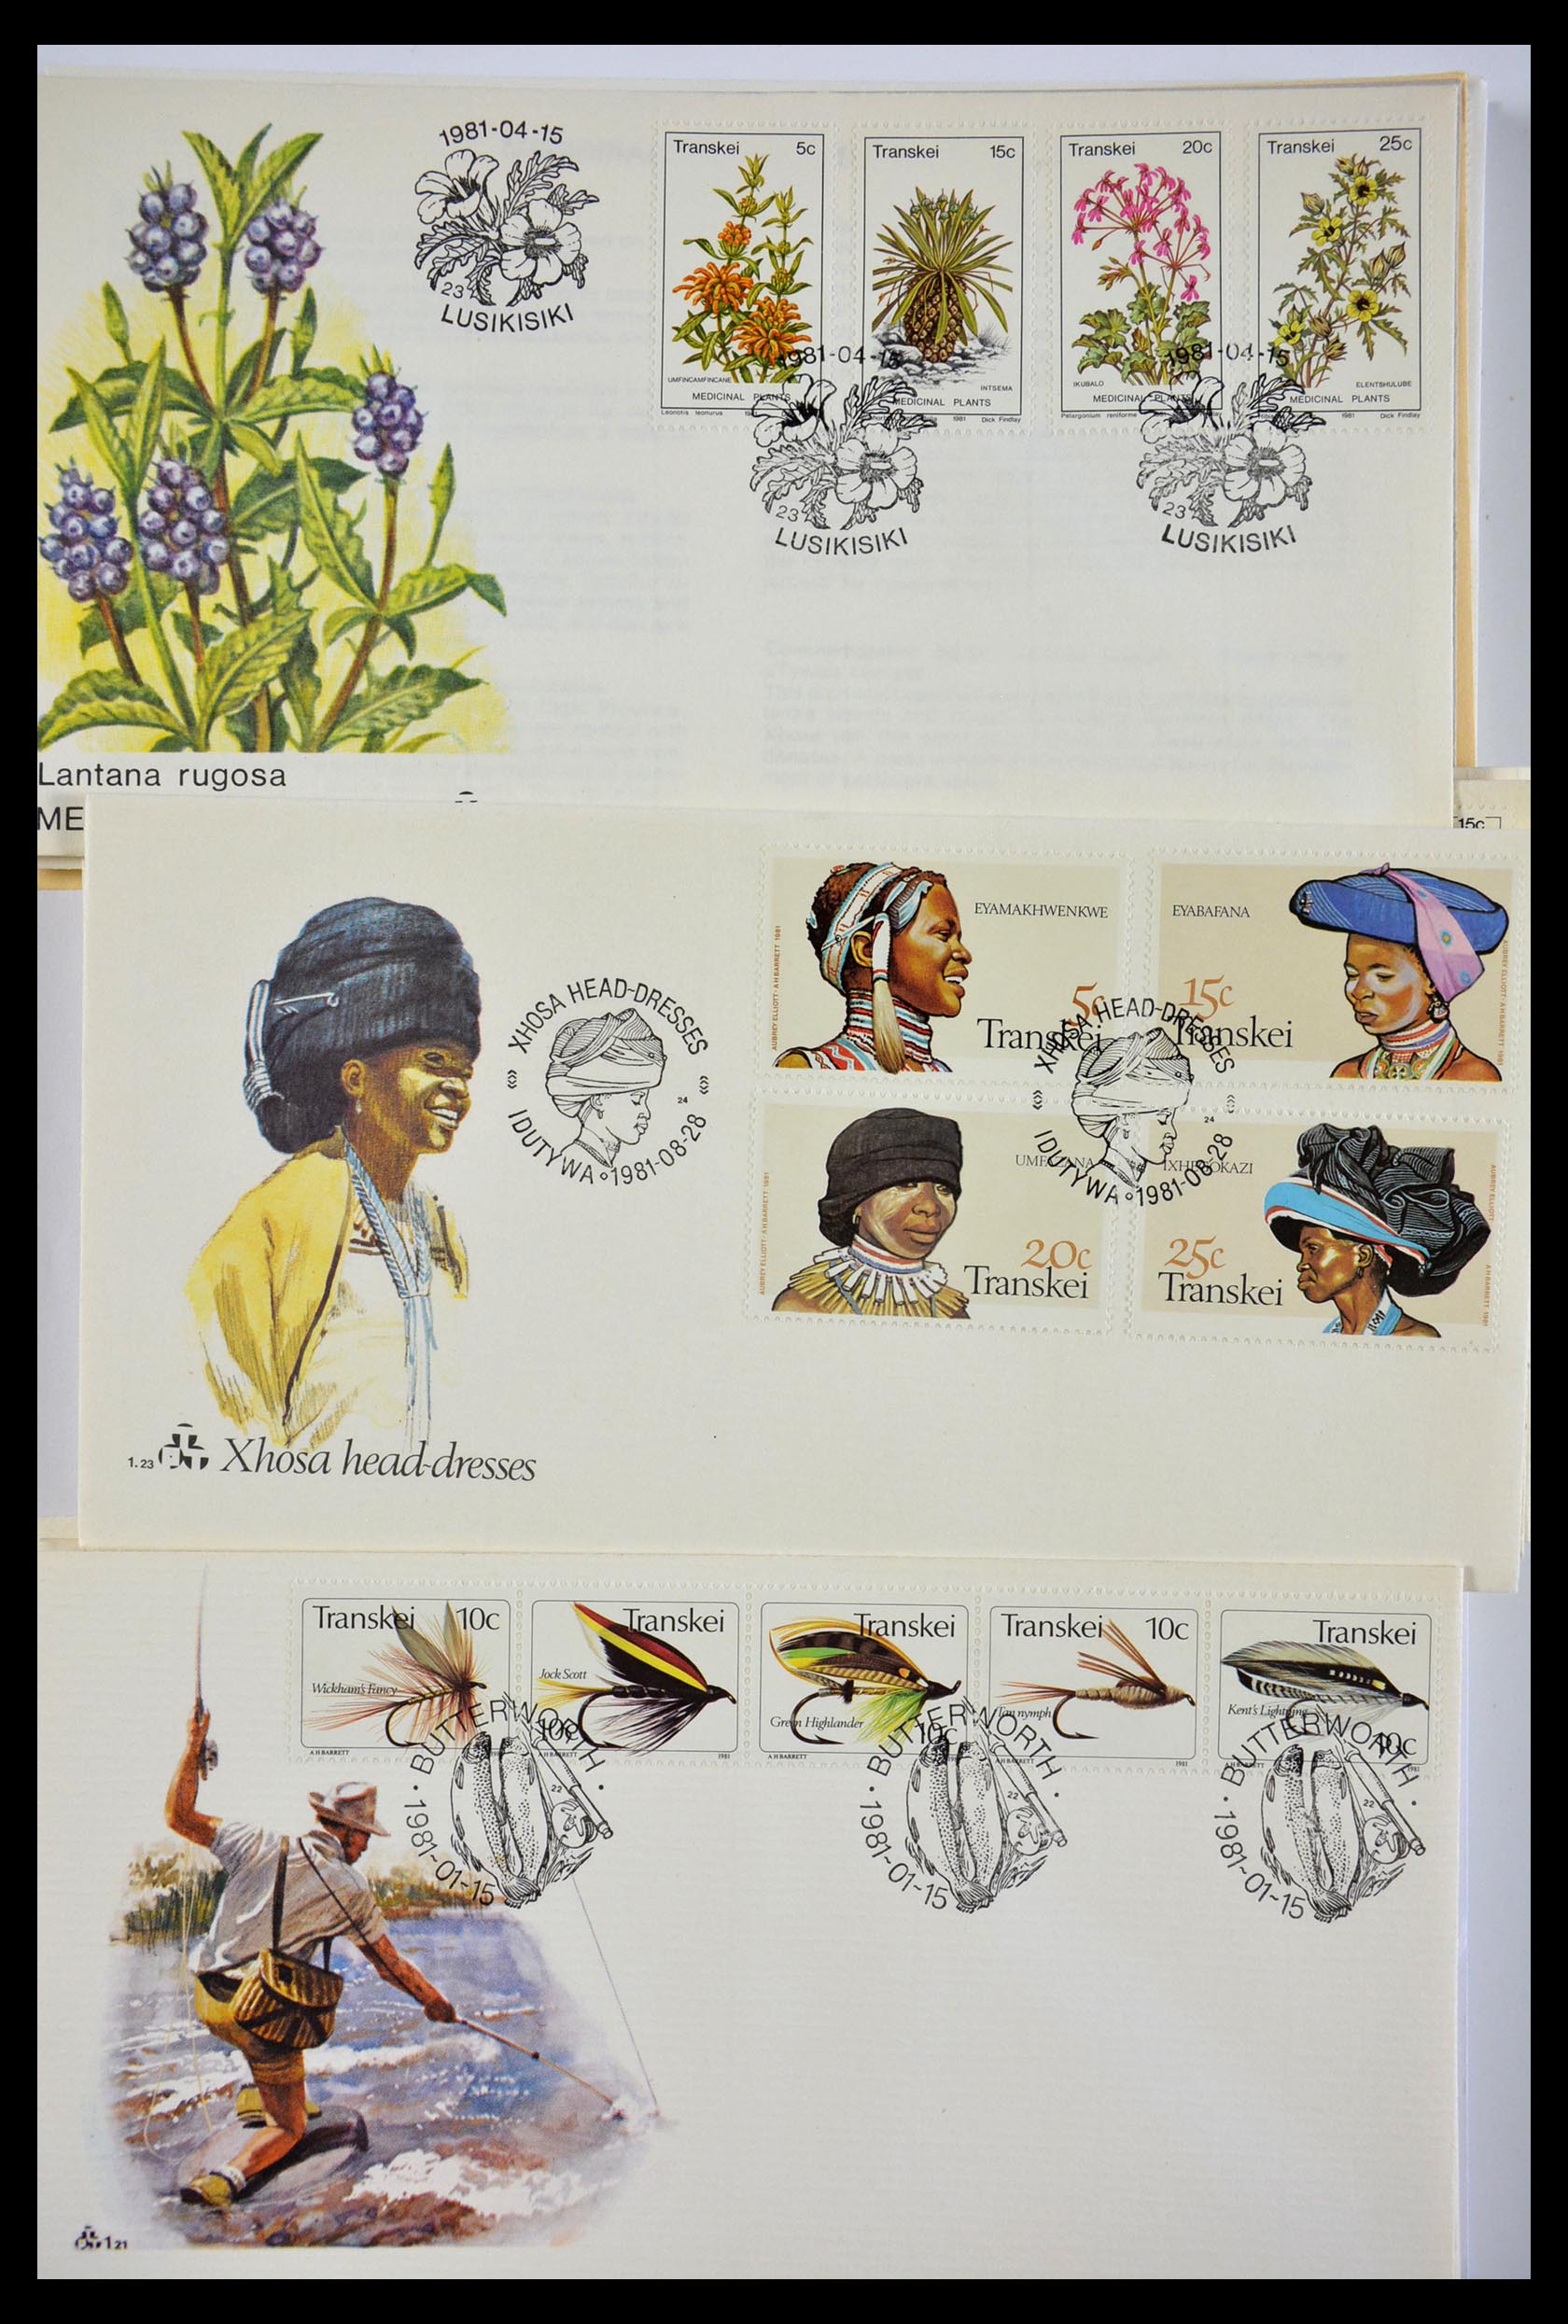 29356 554 - 29356 South Africa homelands first day covers 1979-1991.